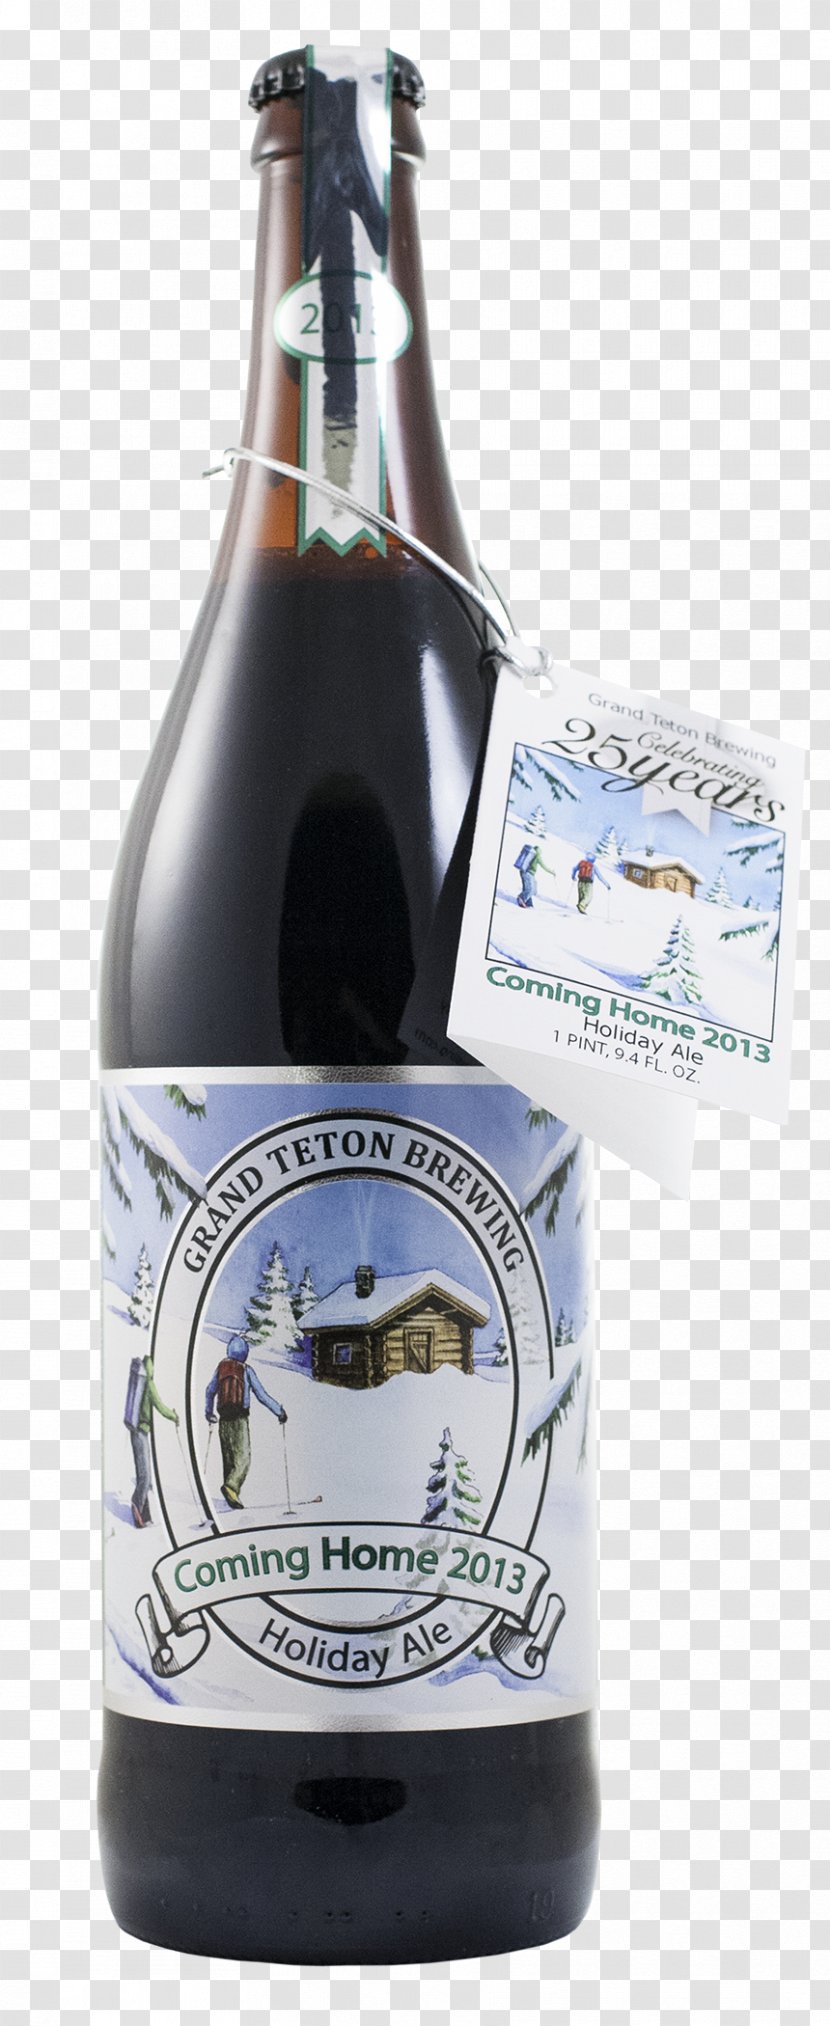 Ale Stout Beer Bottle Grand Teton Brewing Company - Brewery Transparent PNG